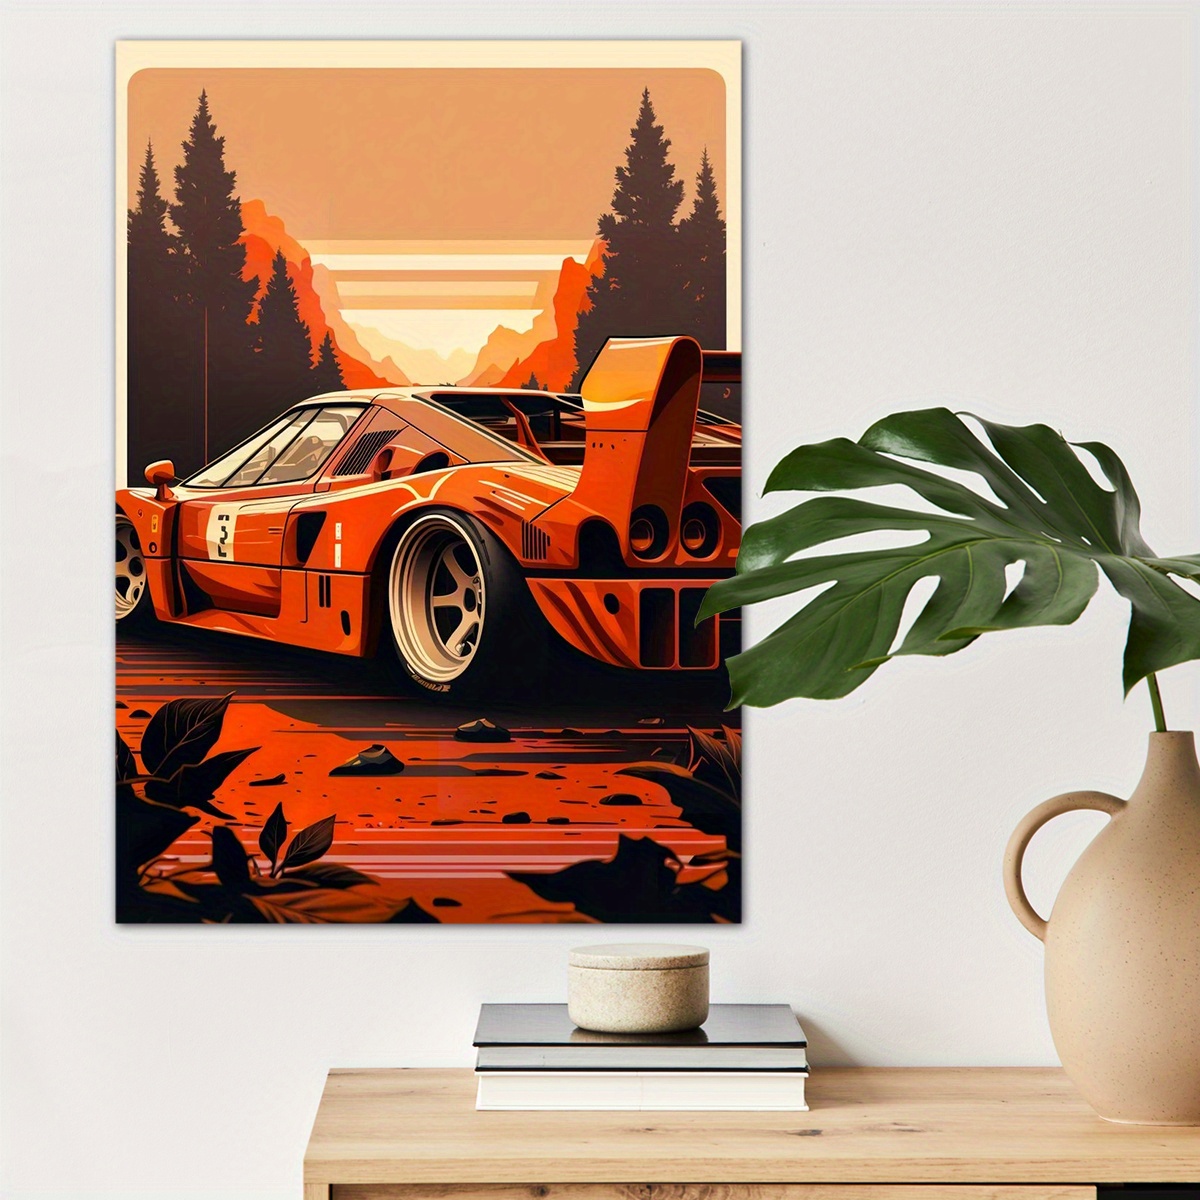 

1pc Yellow Retro Sports Car Poster Canvas Wall Art For Home Decor, Car Lovers Poster Wall Decor Roadster Canvas Prints For Living Room Bedroom Kitchen Office Cafe Decor, Perfect Gift And Decoration